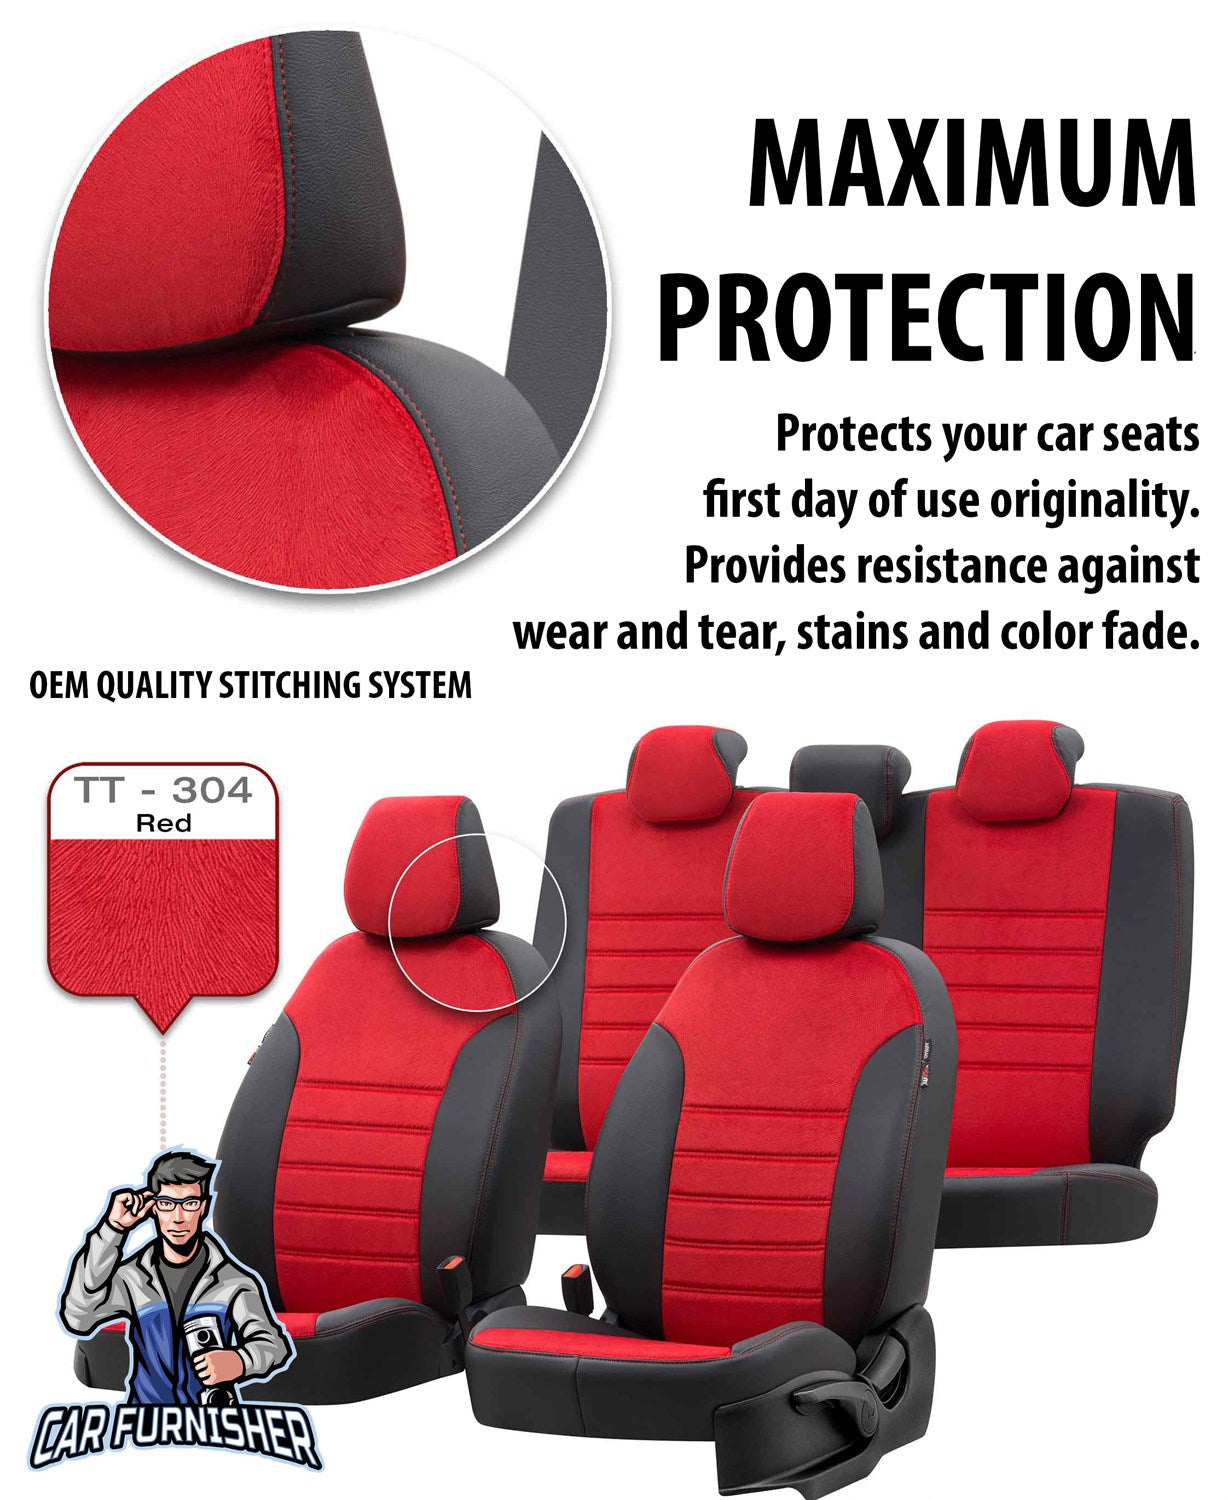 Audi A1 Car Seat Cover 2011-2016 Custom Made London Design Red Full Set (5 Seats + Handrest) Leather & Fabric